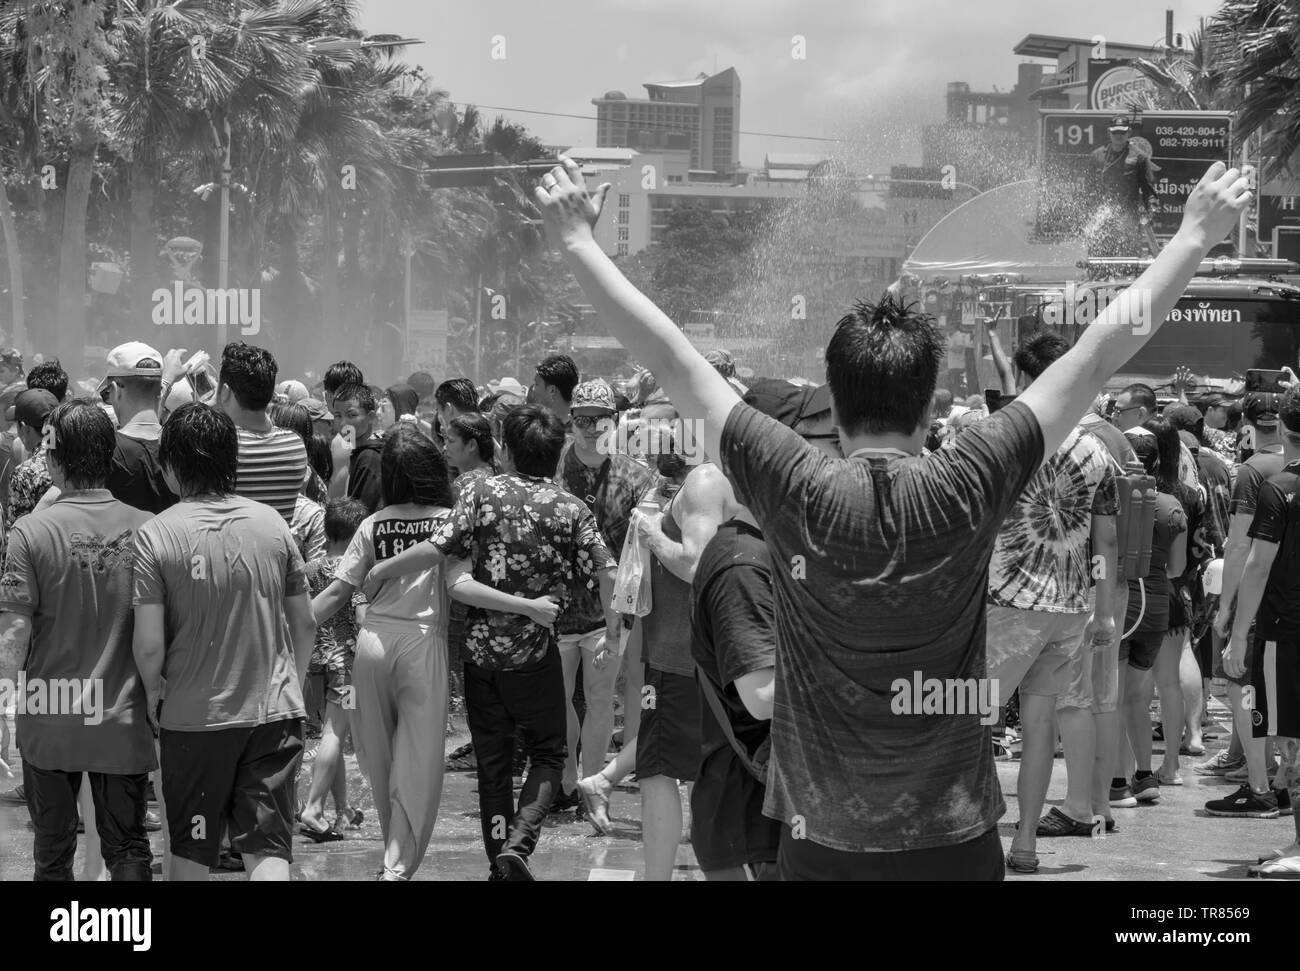 PATTAYA,THAILAND - APRIL 19,2019:Beachroad Thousands of people were celebrating the last day of Songkran,which is the New Years Eve of Thailand, Stock Photo